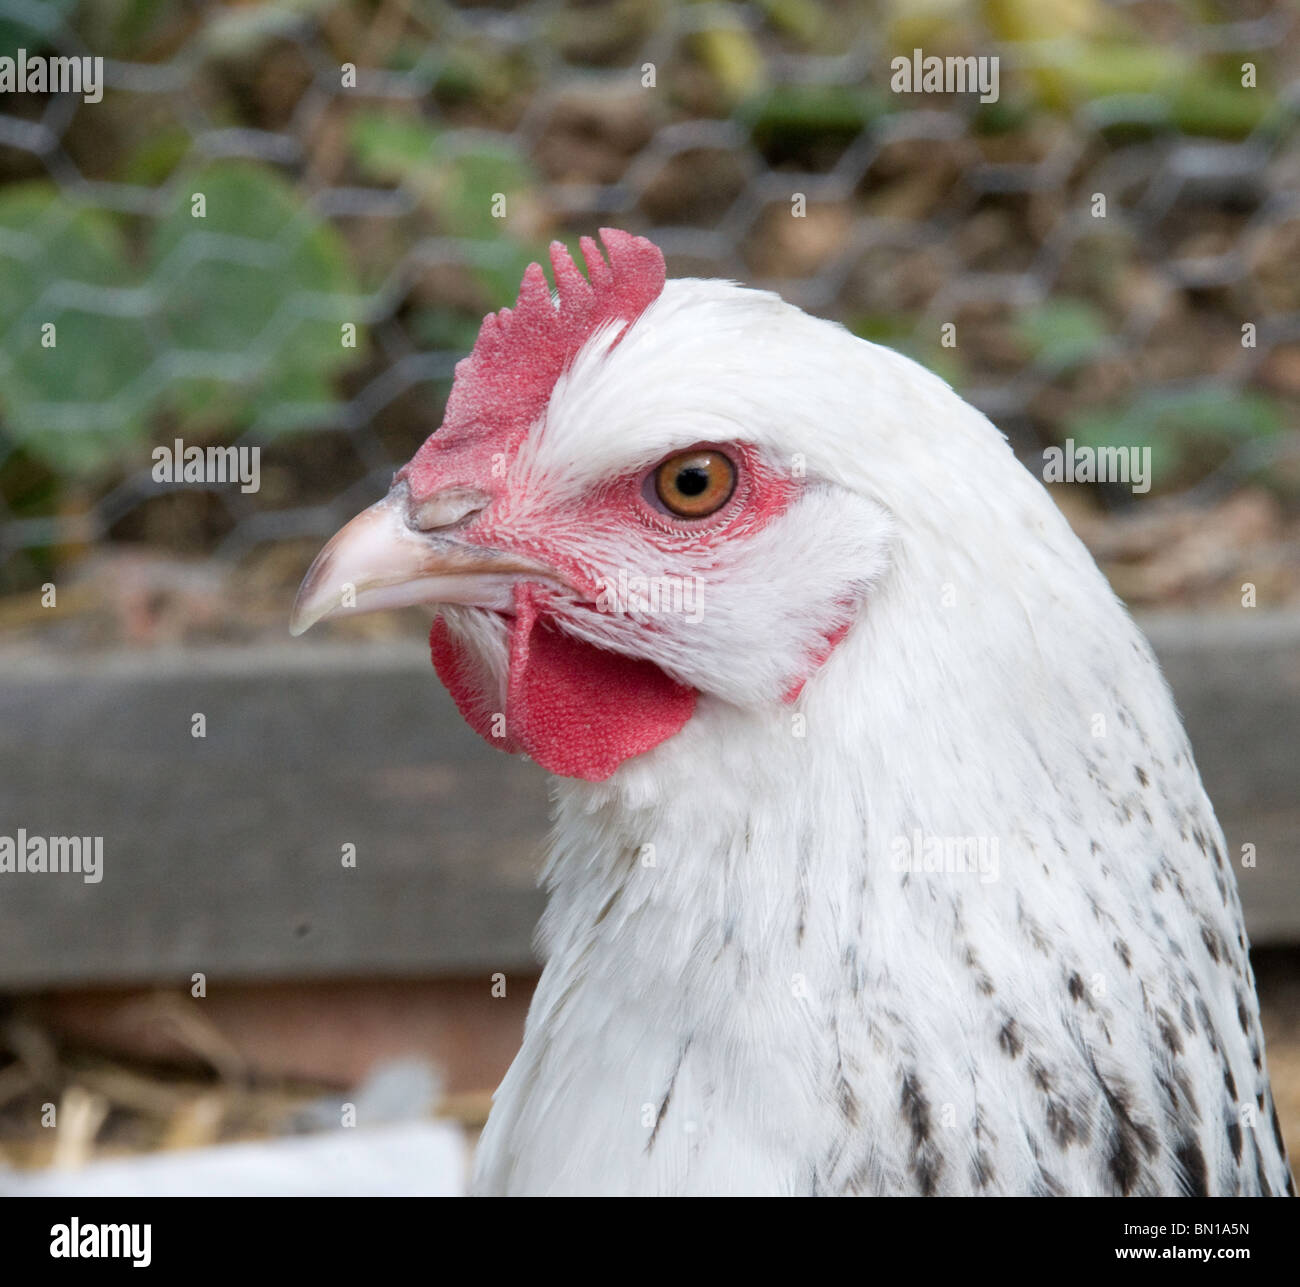 Light Sussex hen, close up of head Stock Photo